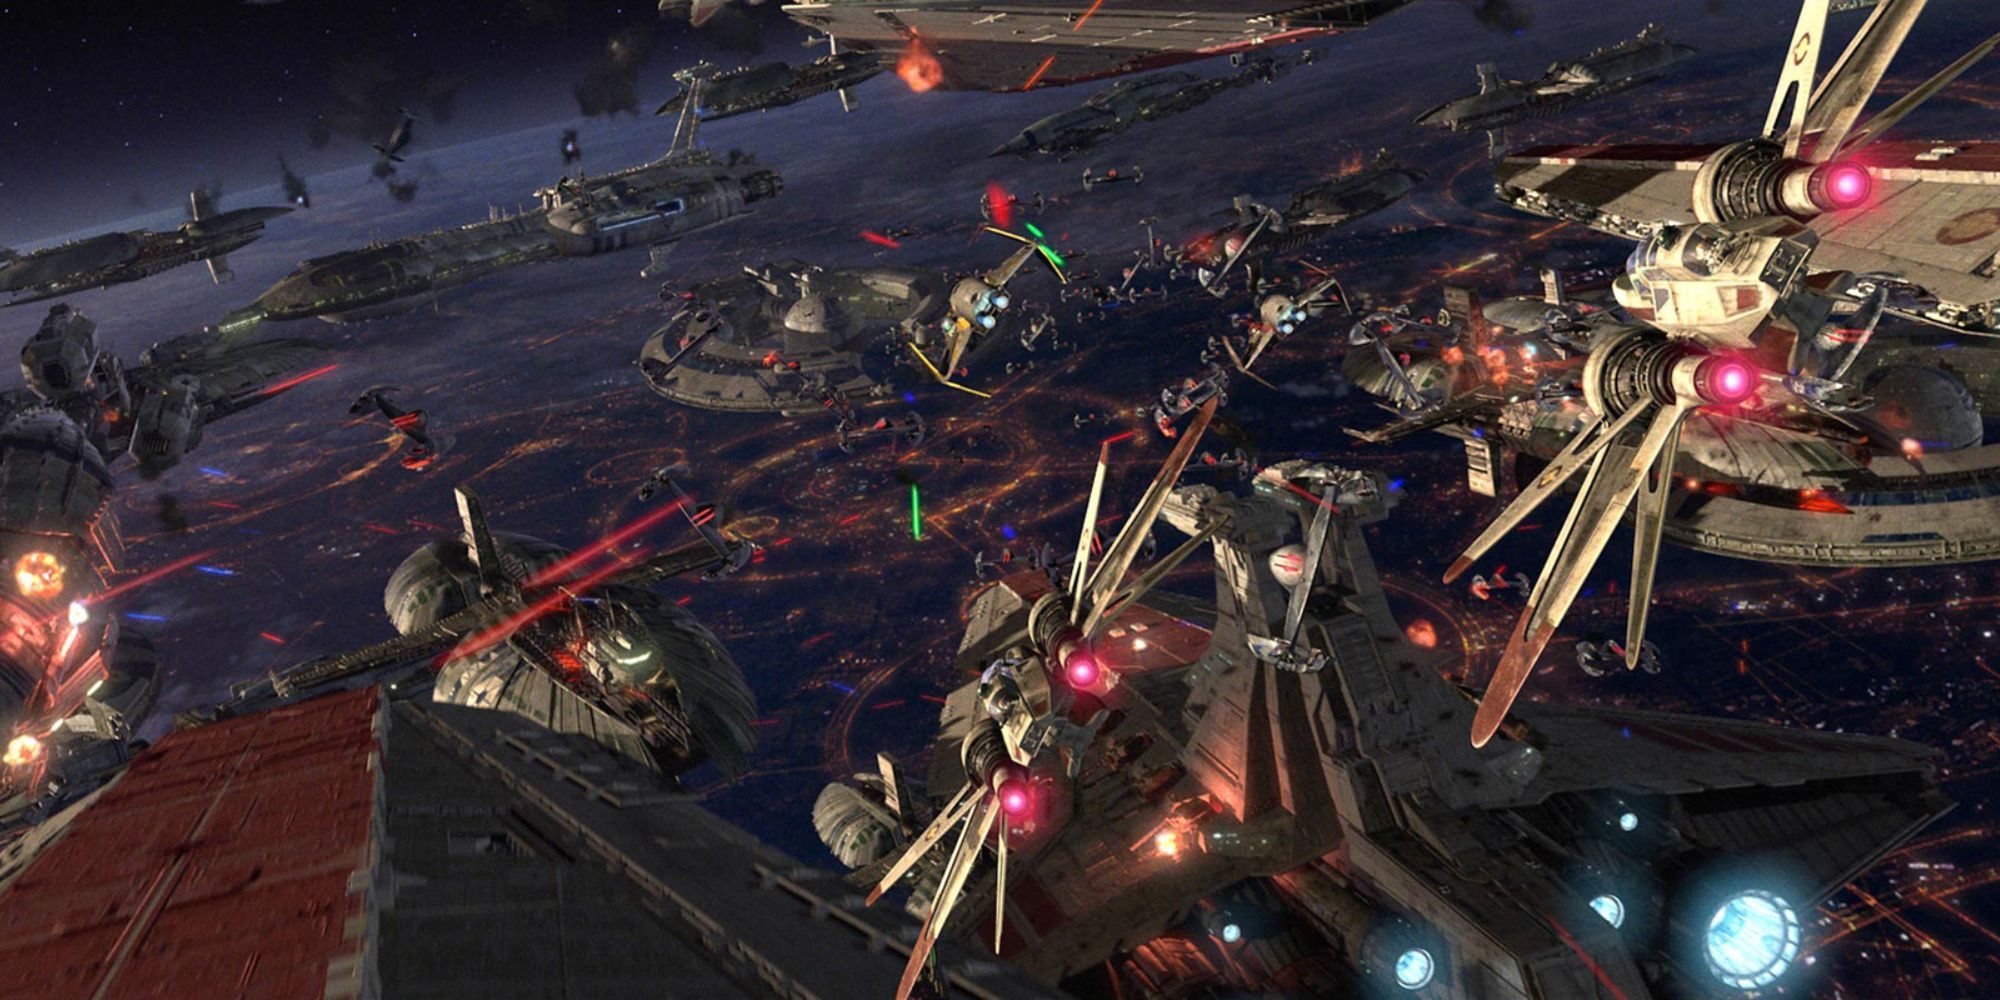 Republic and Trade Federation forces clashed over Coruscant